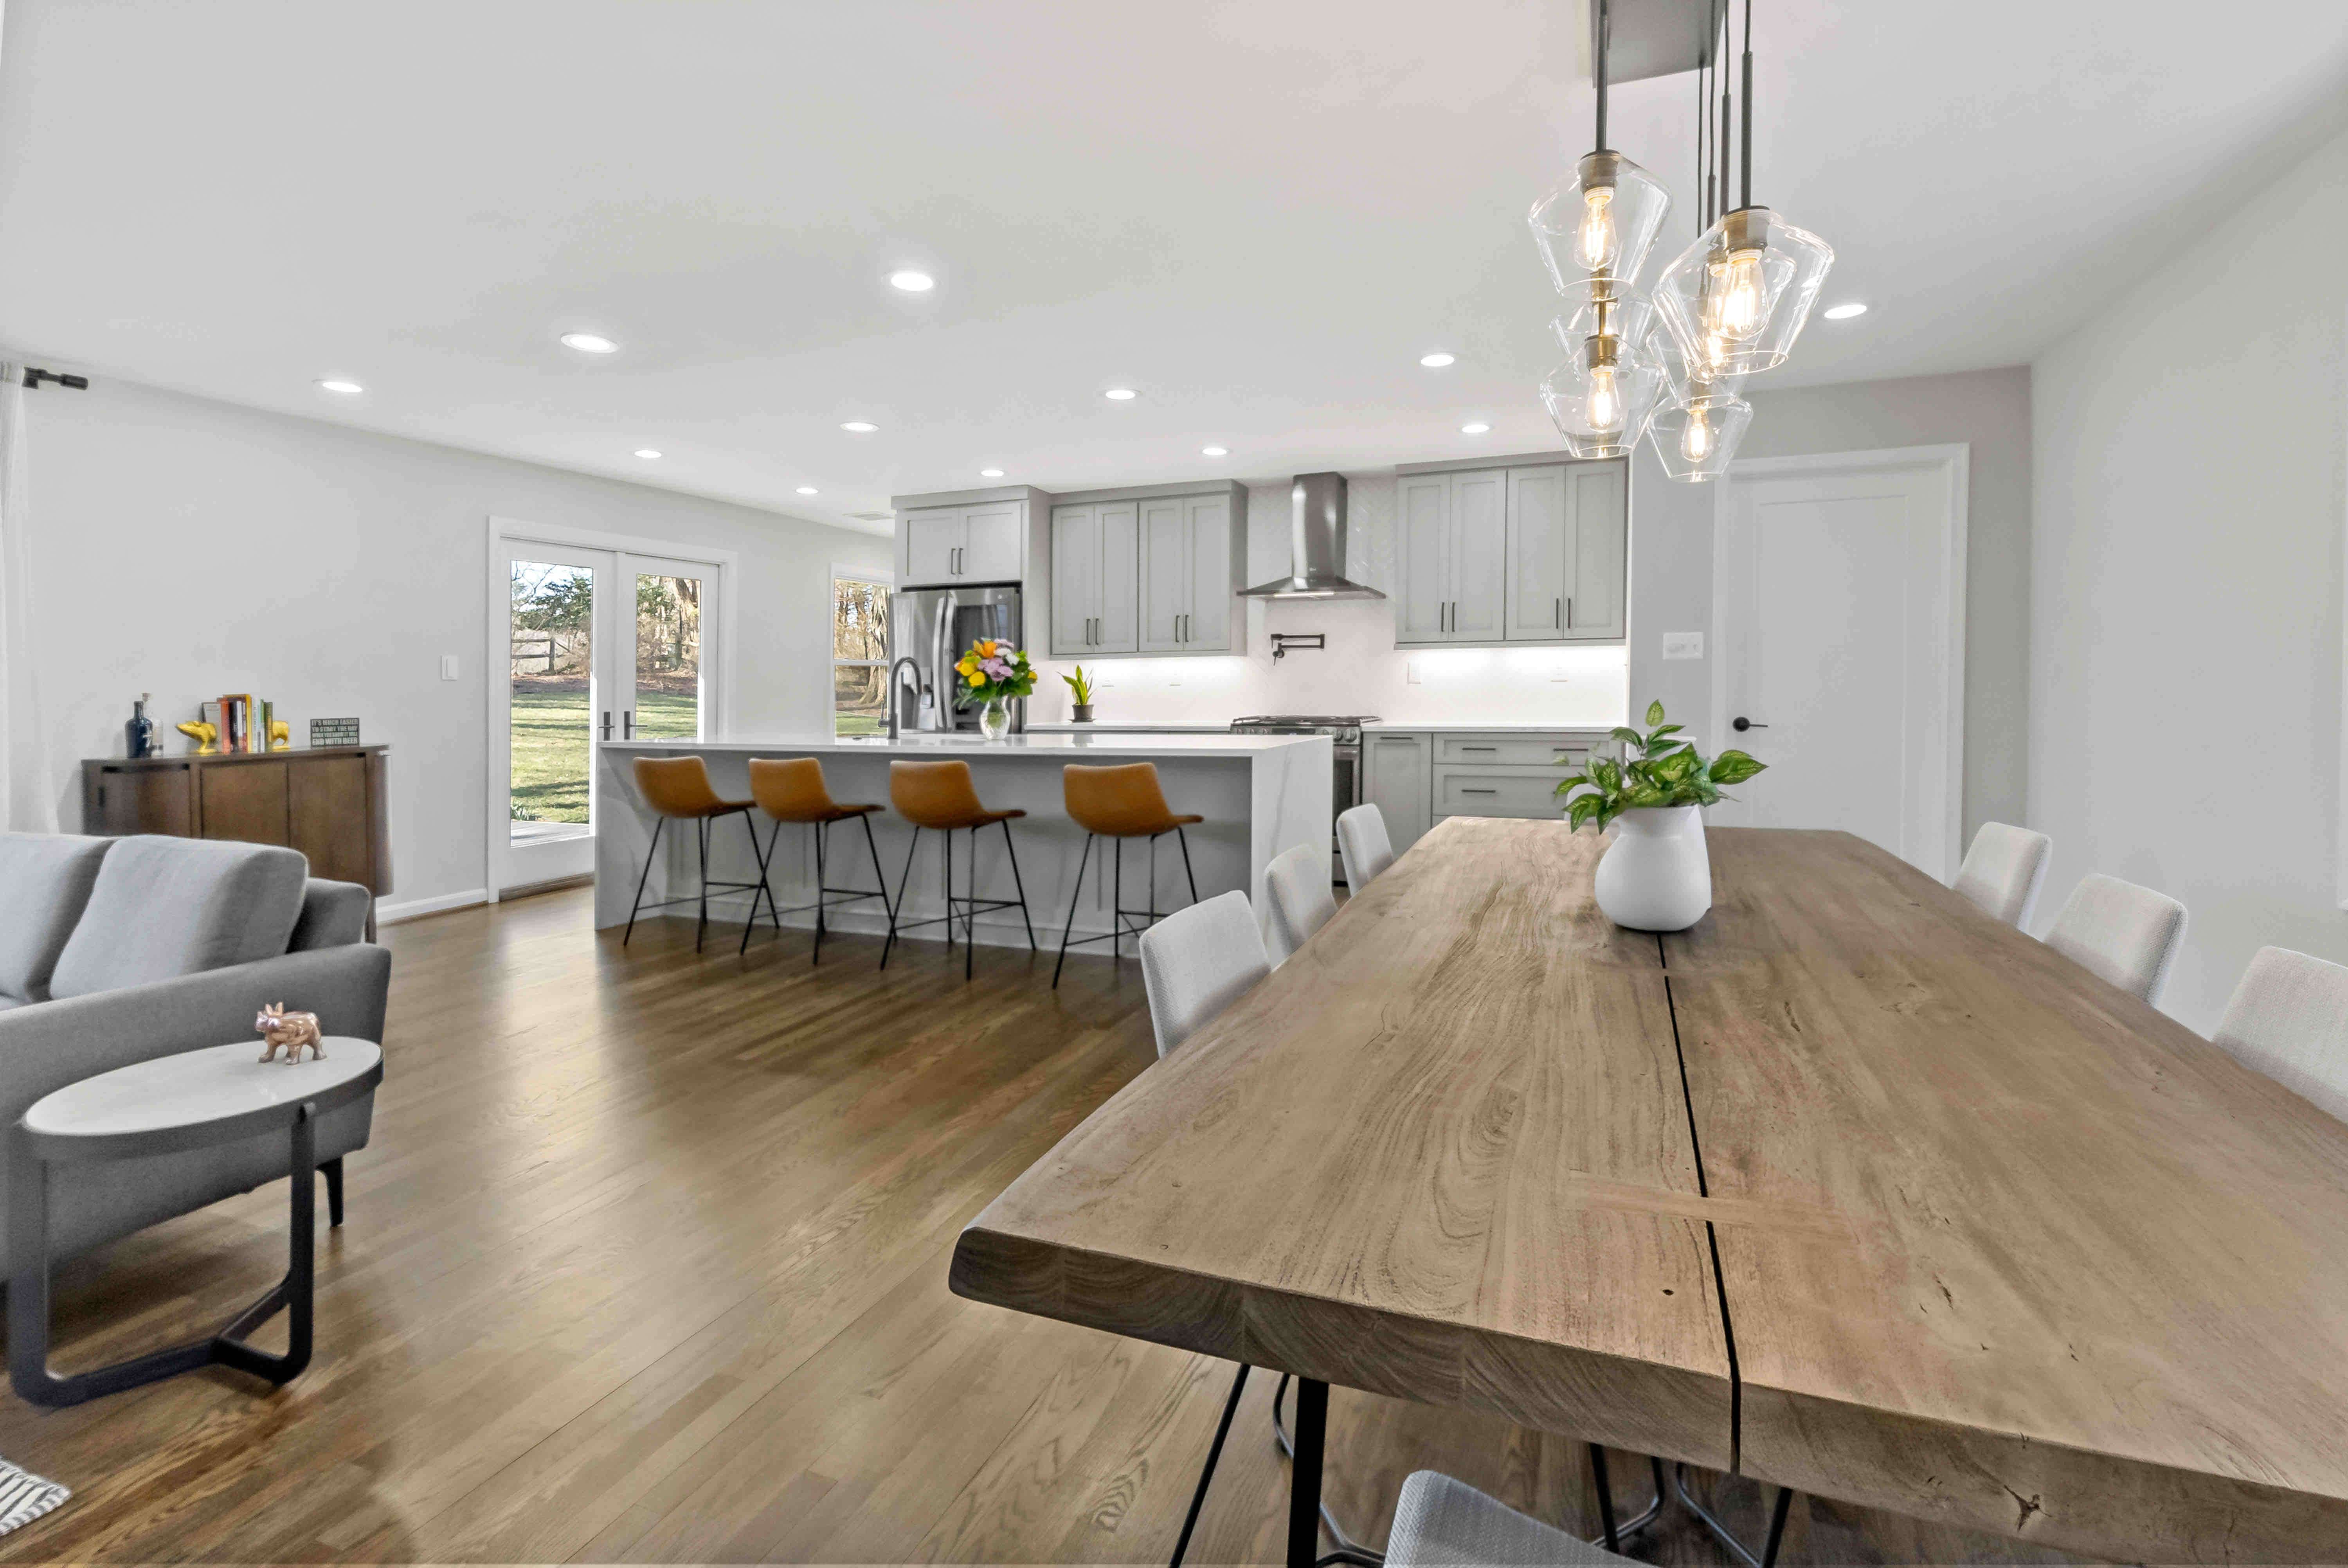 Open concept kitchen space with living room and dining table